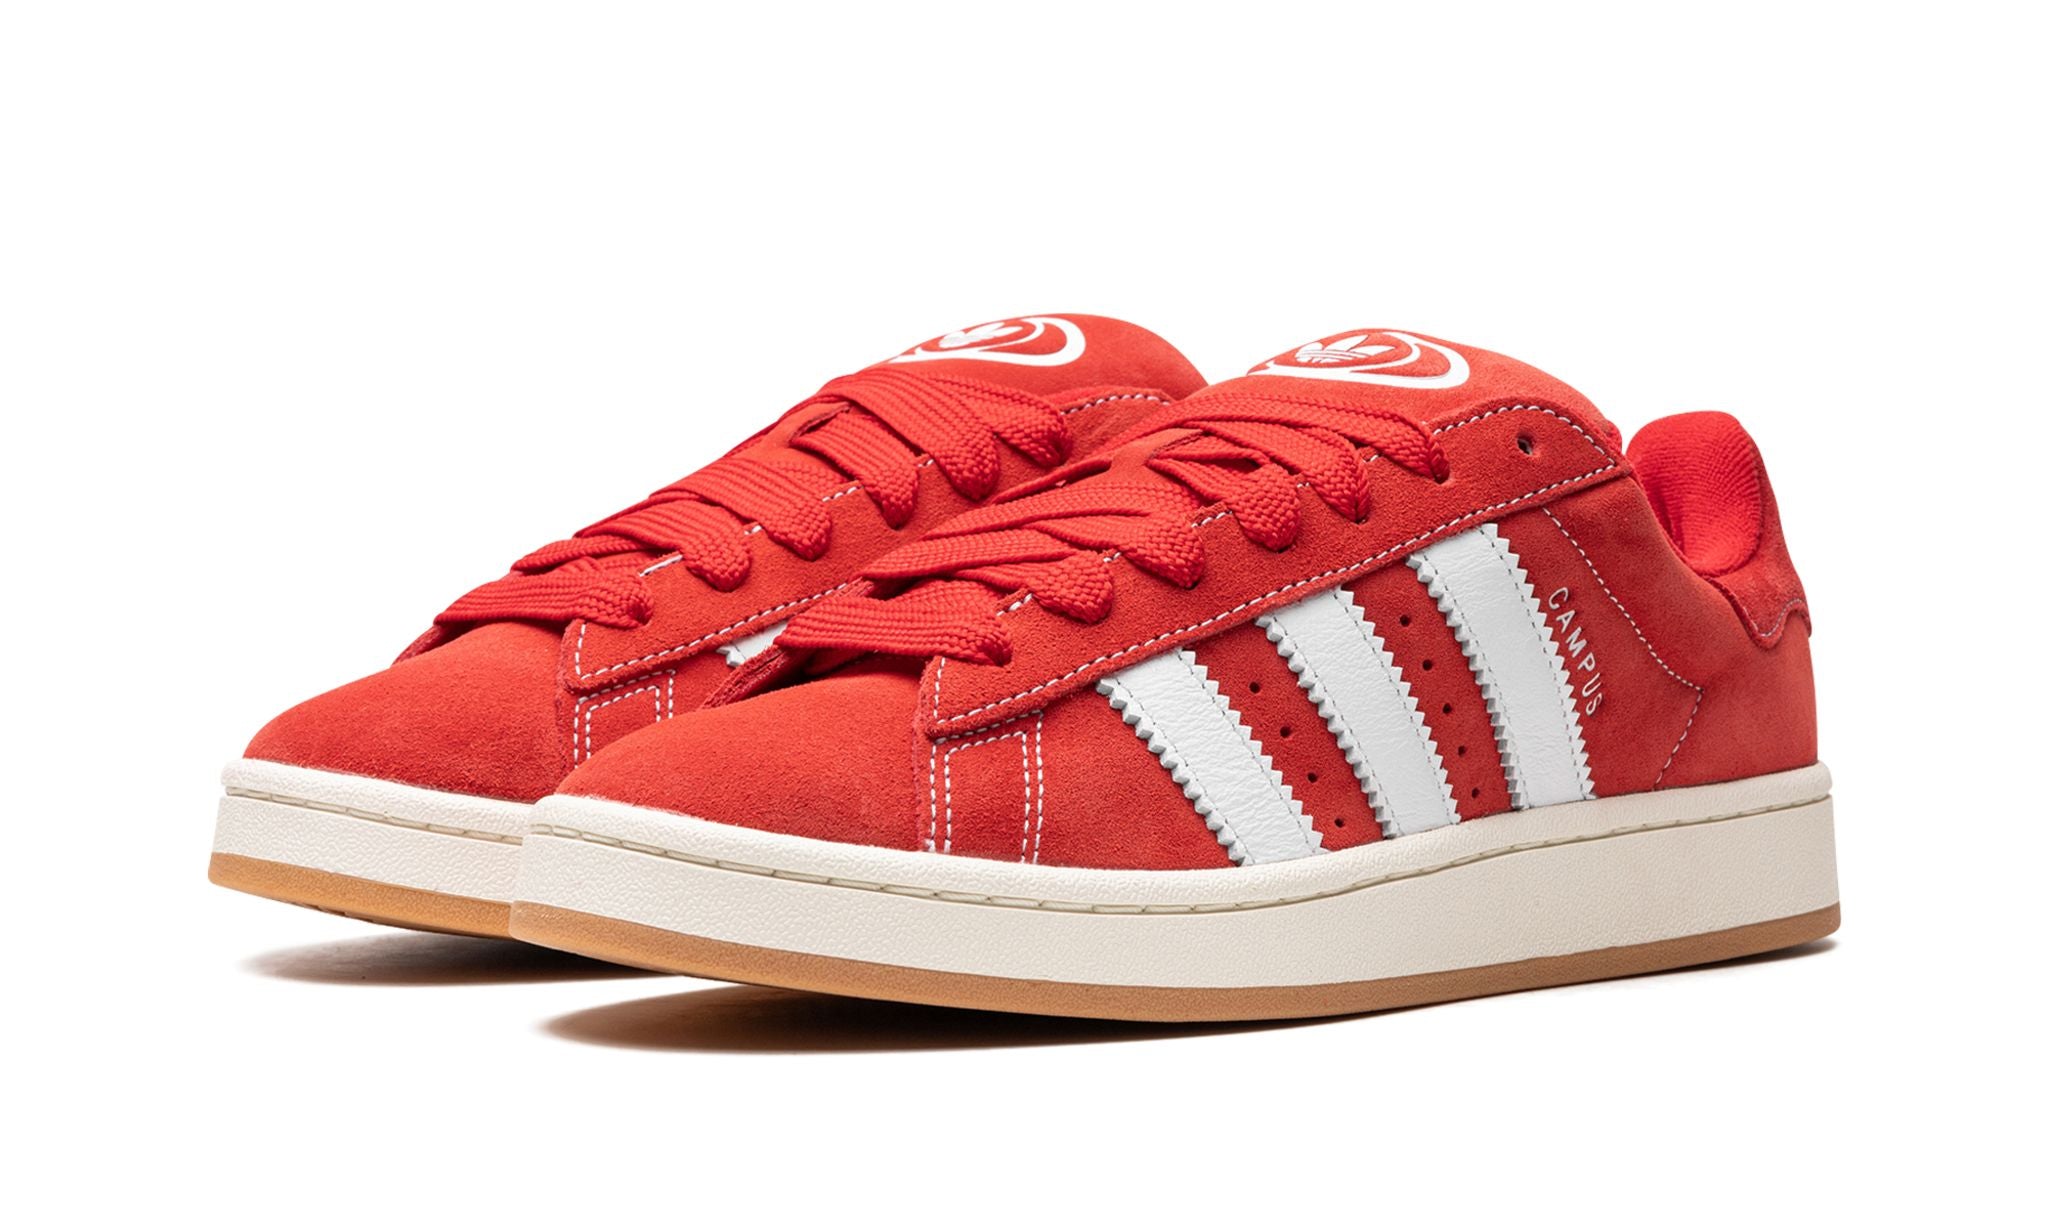 ADIDAS CAMPUS 00S "Better Scarlet Cloud White"